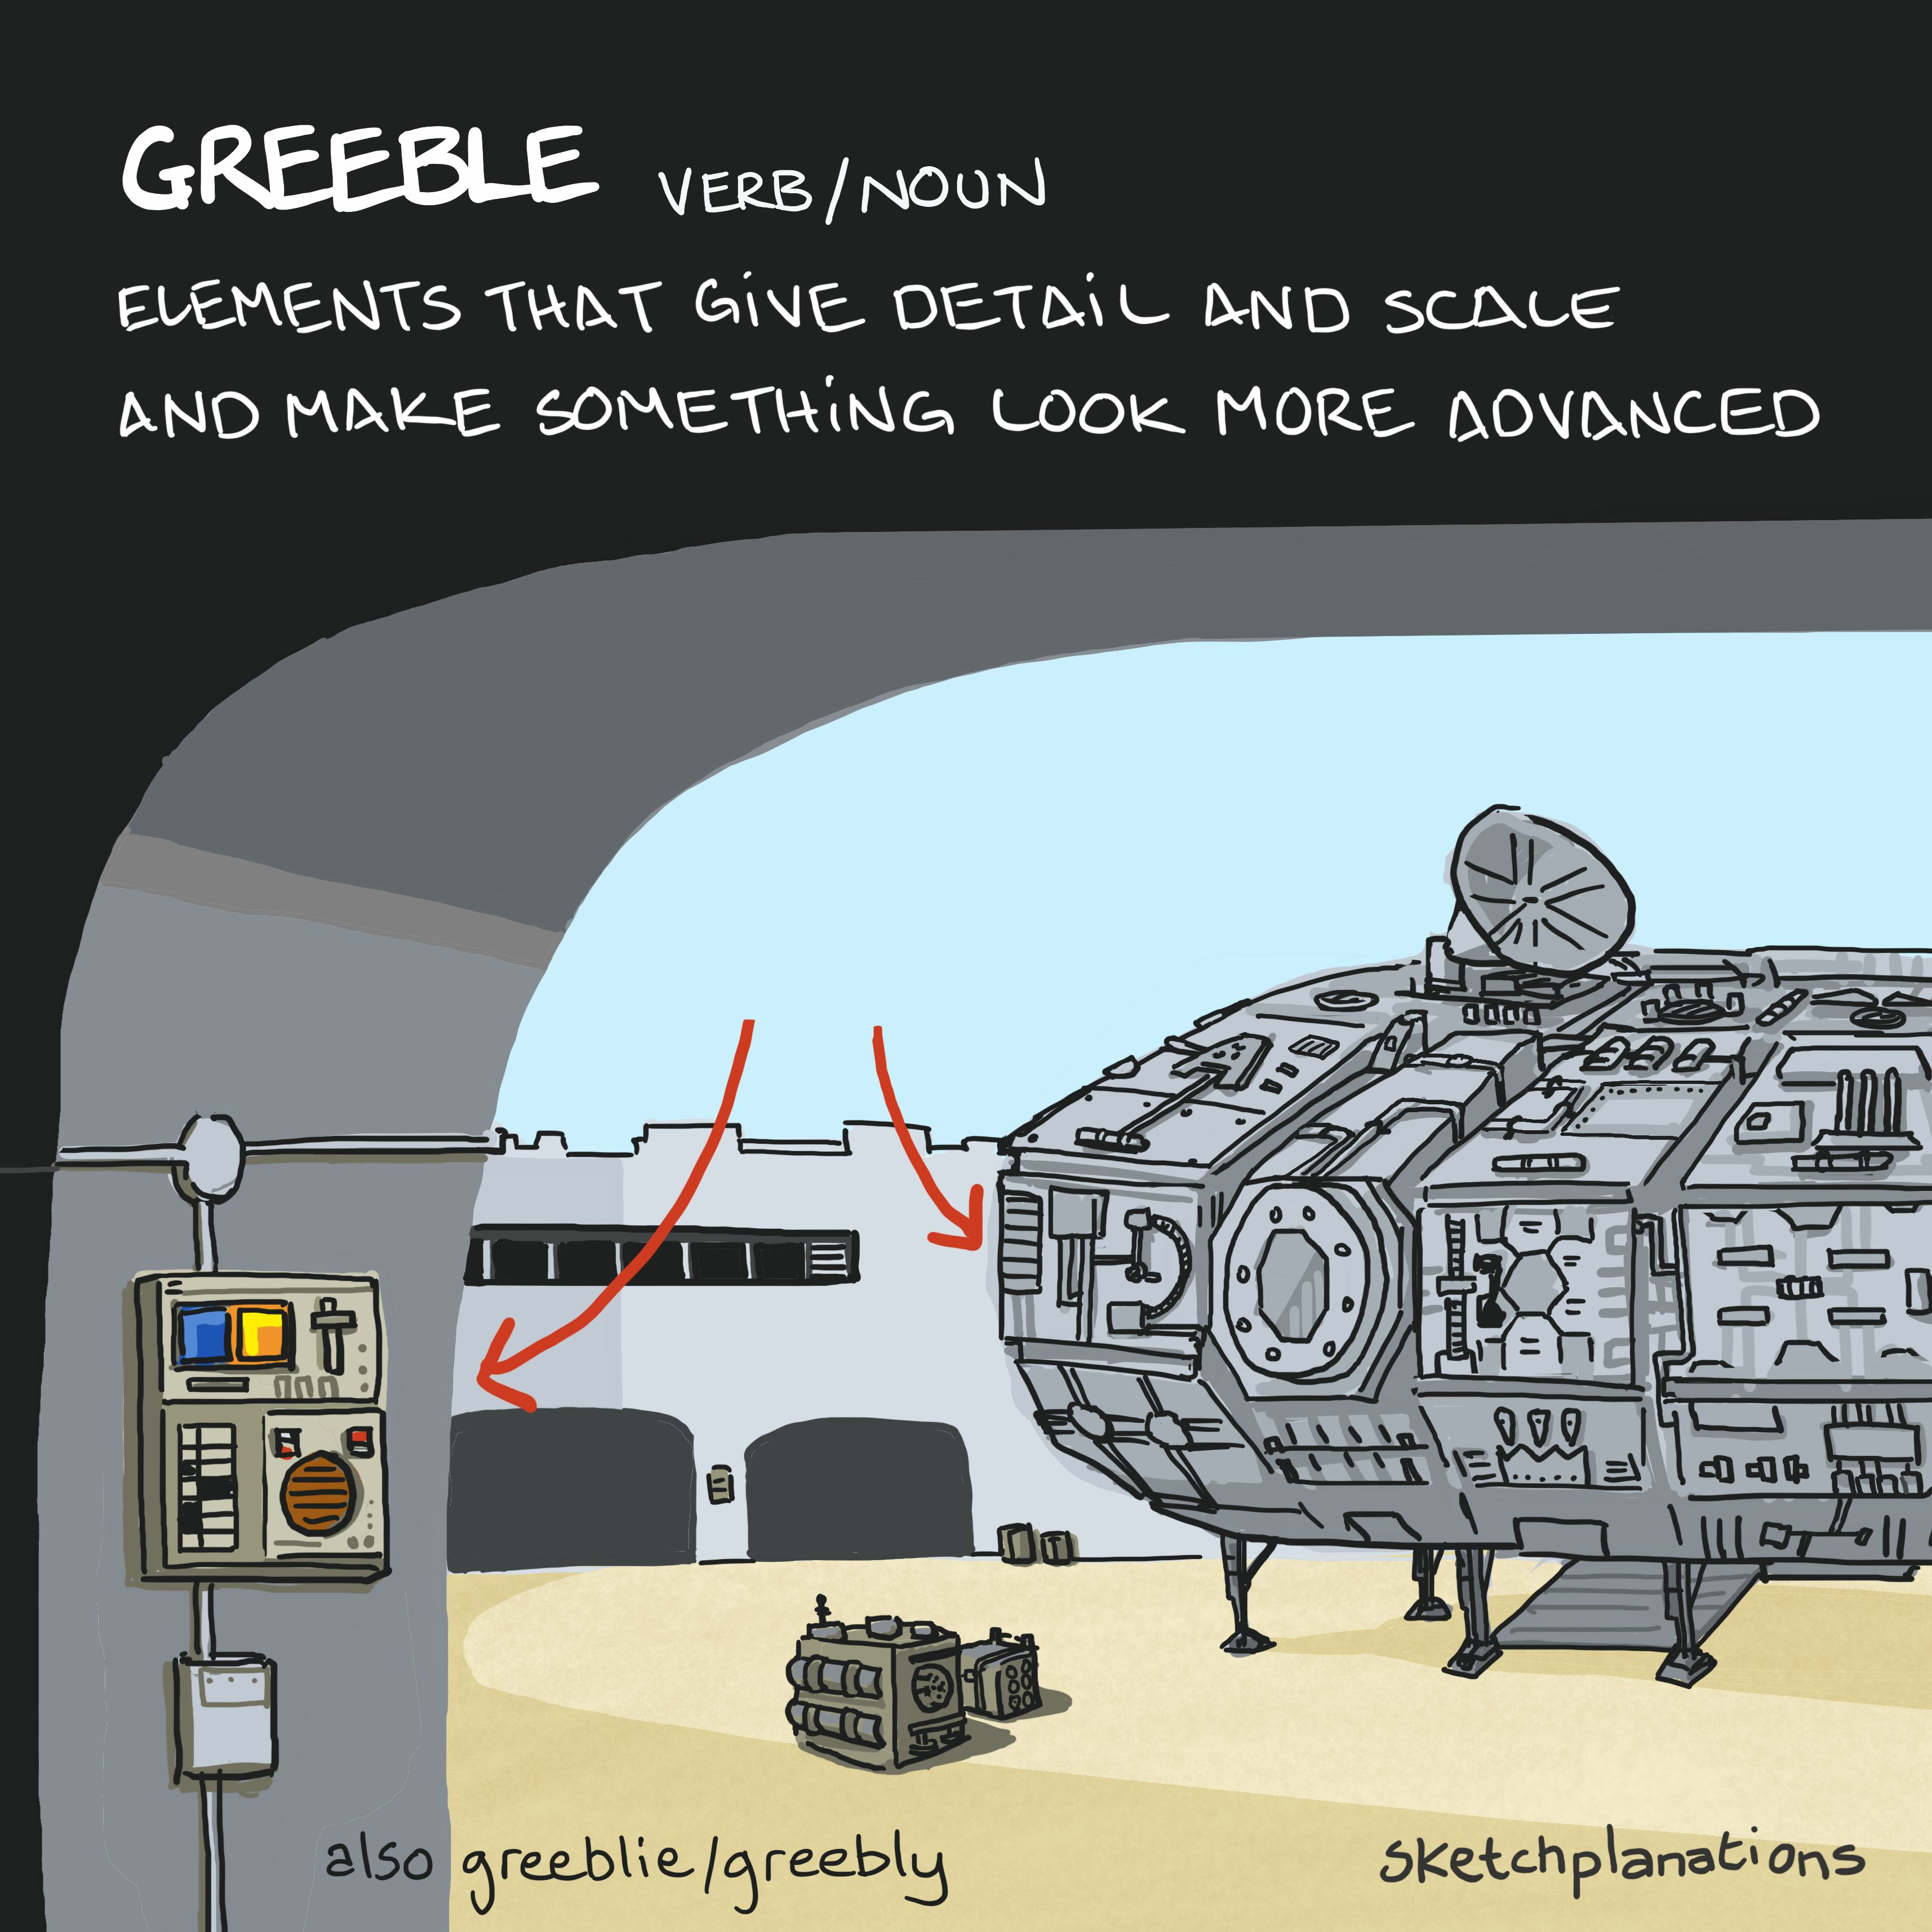 Greeble or greeblie illustration: showing a panel of buttons on a wall and a ship in a spaceport rather like the Millenium Falcom full of small elements that give detail and scale